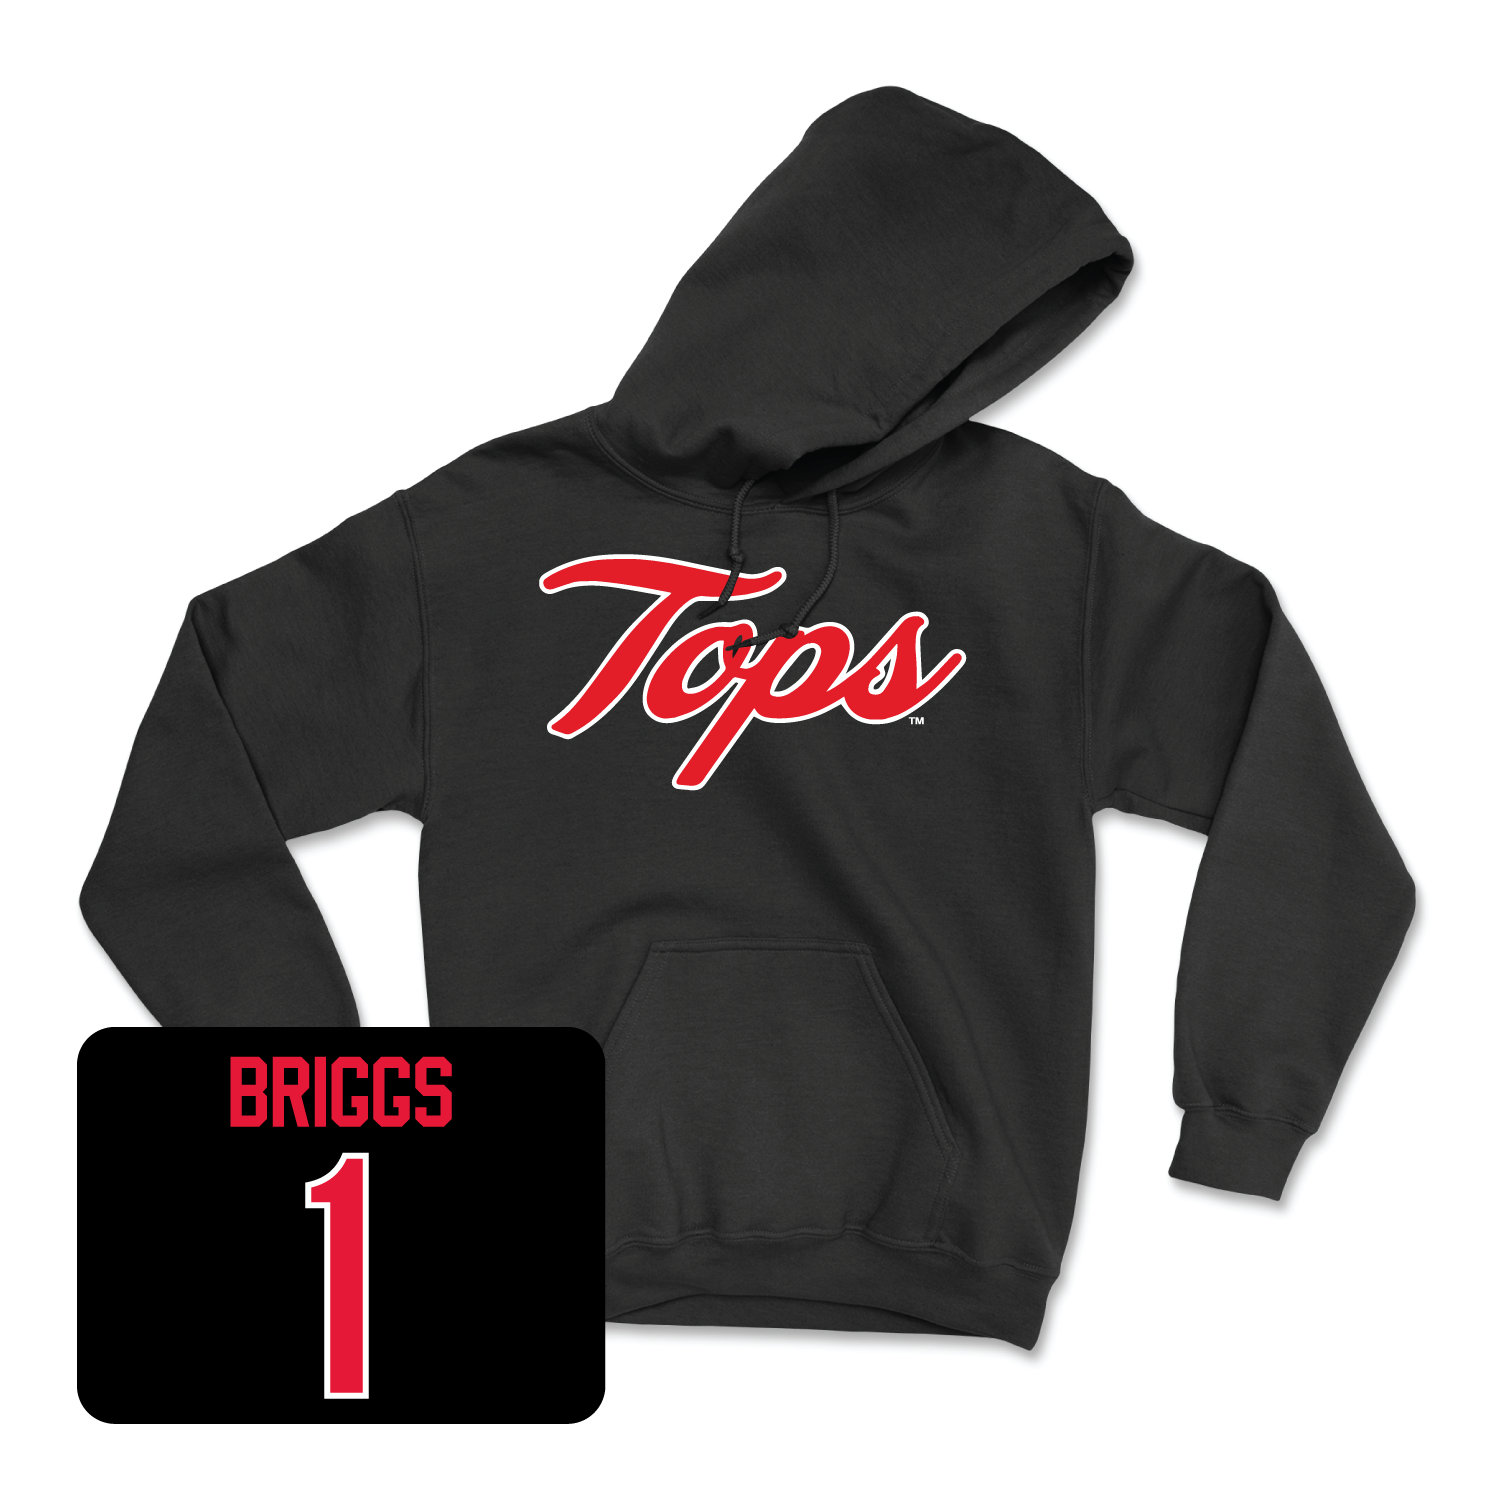 Black Women's Volleyball Tops Hoodie X-Large / Paige Briggs | #1